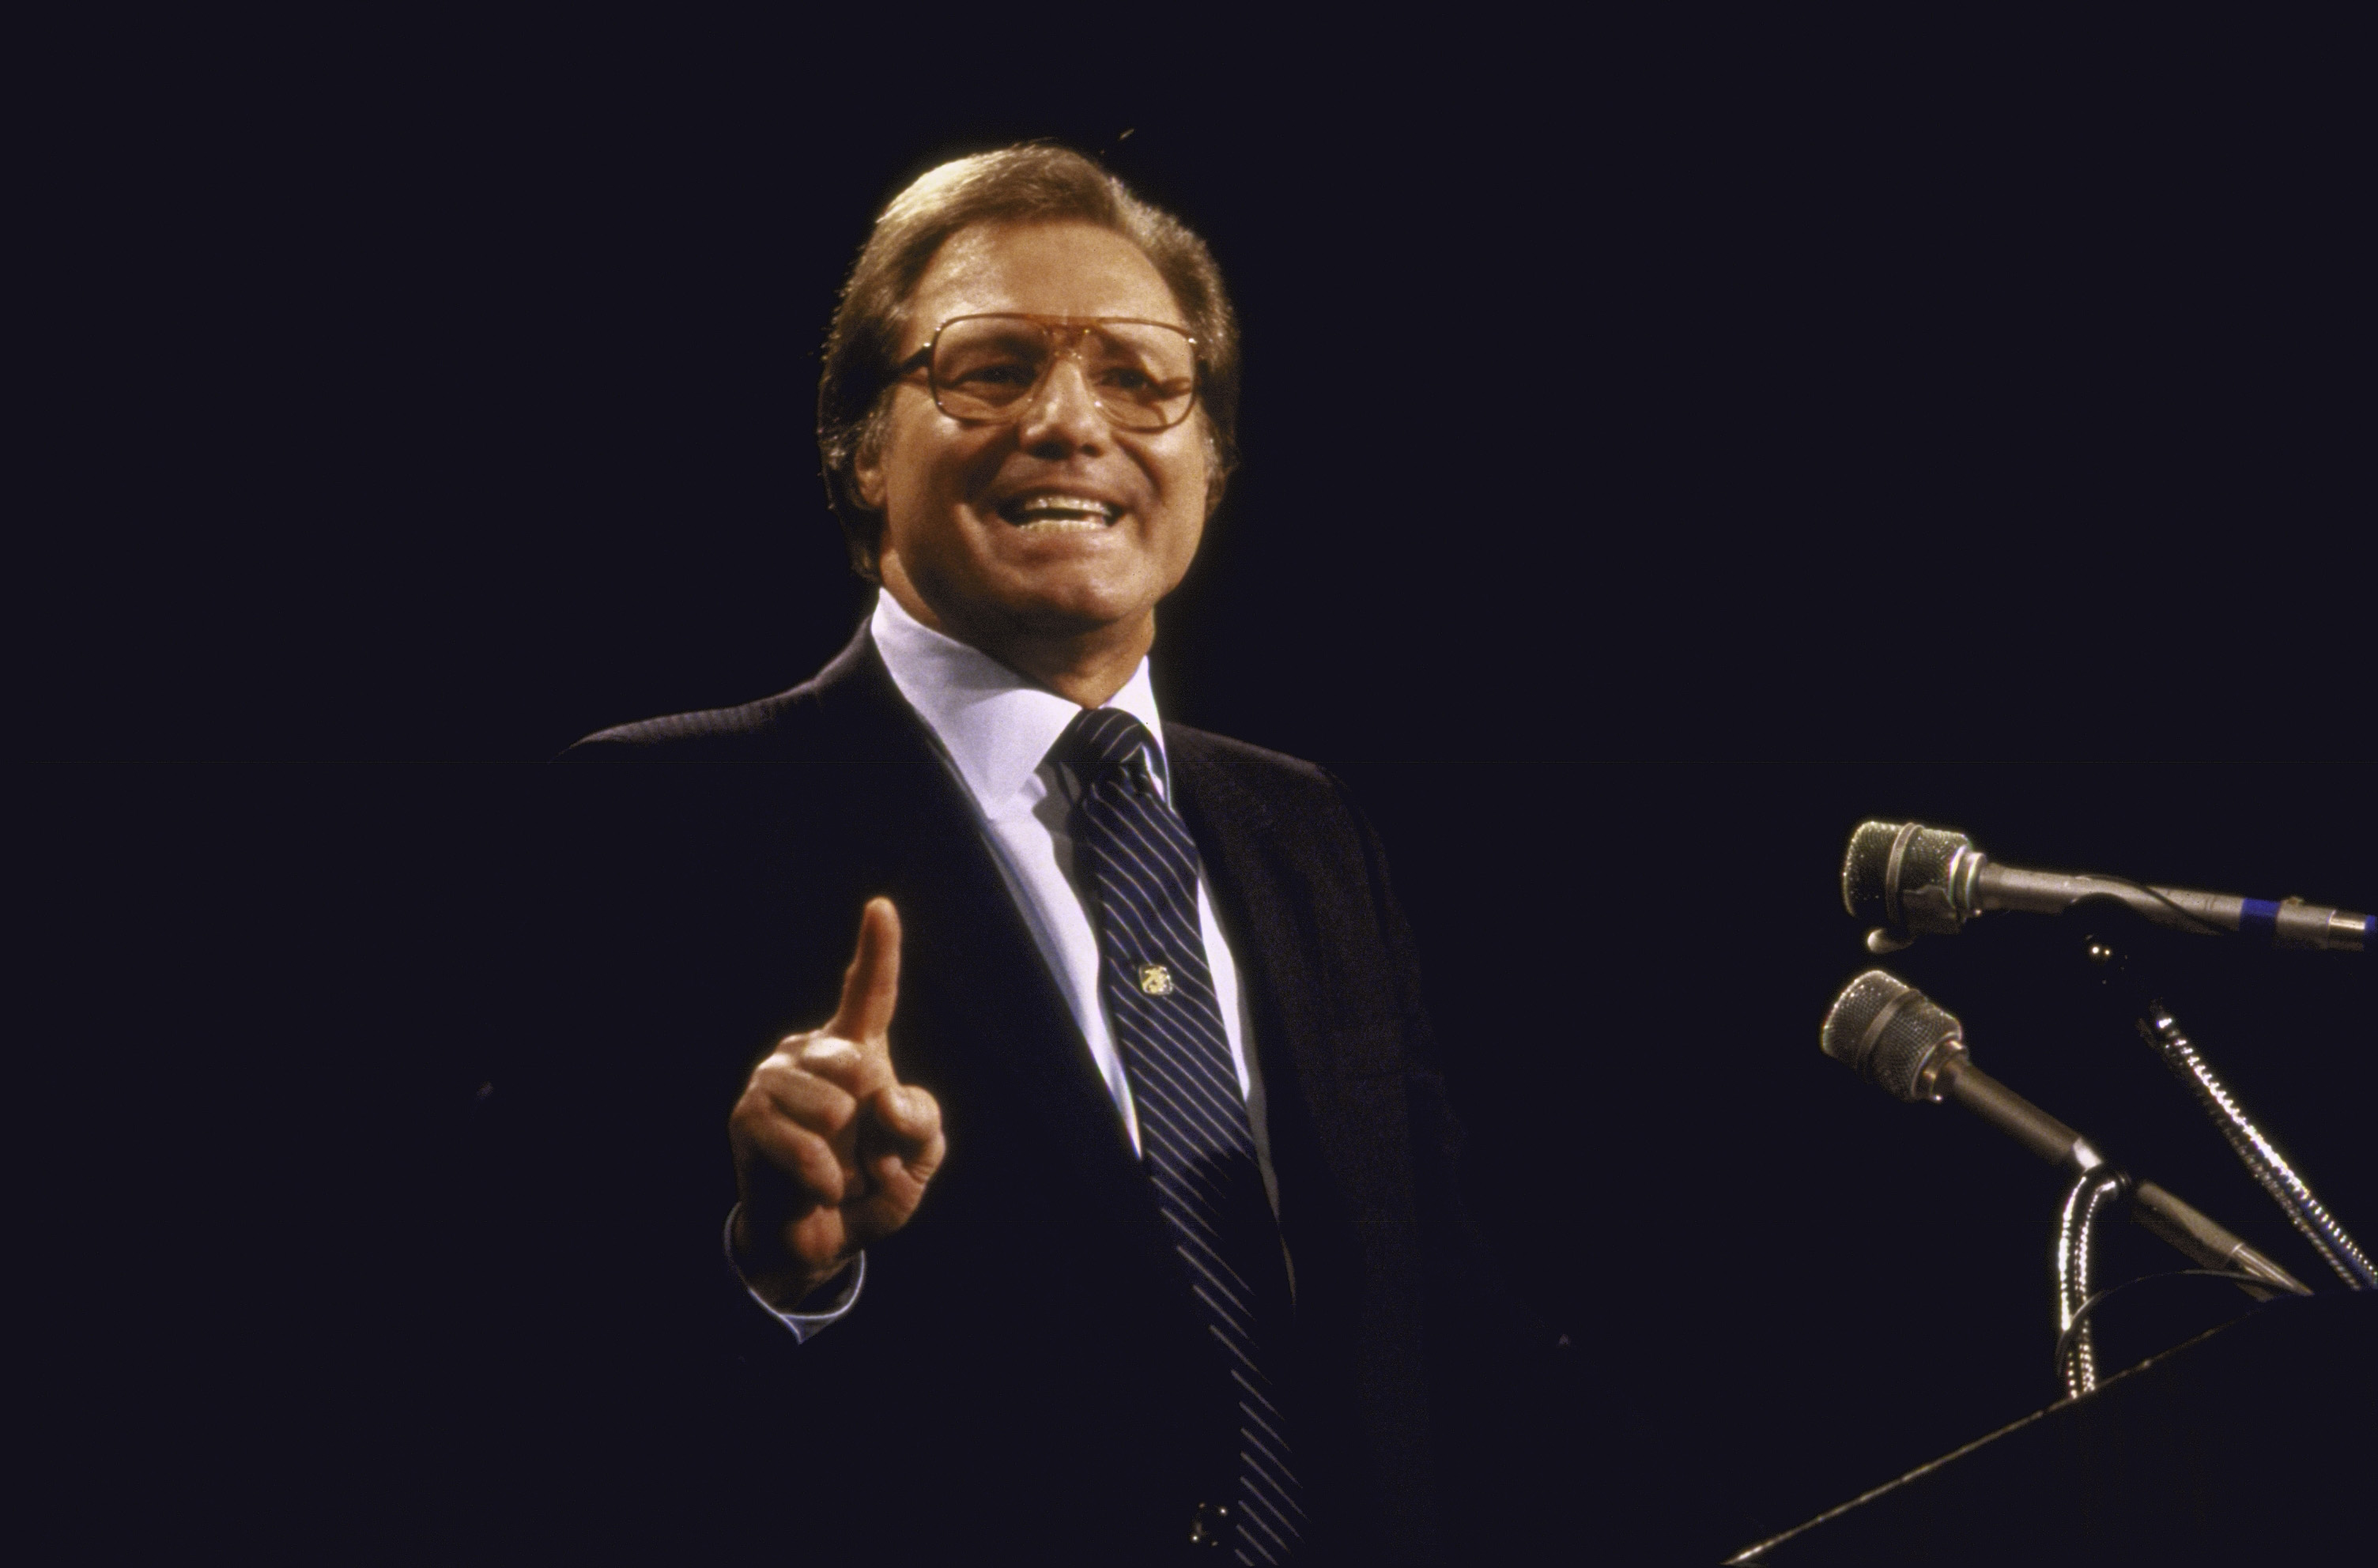 Jimmy Swaggart speaks at convention of religions broadcasters in 1986. | Source: Getty Images